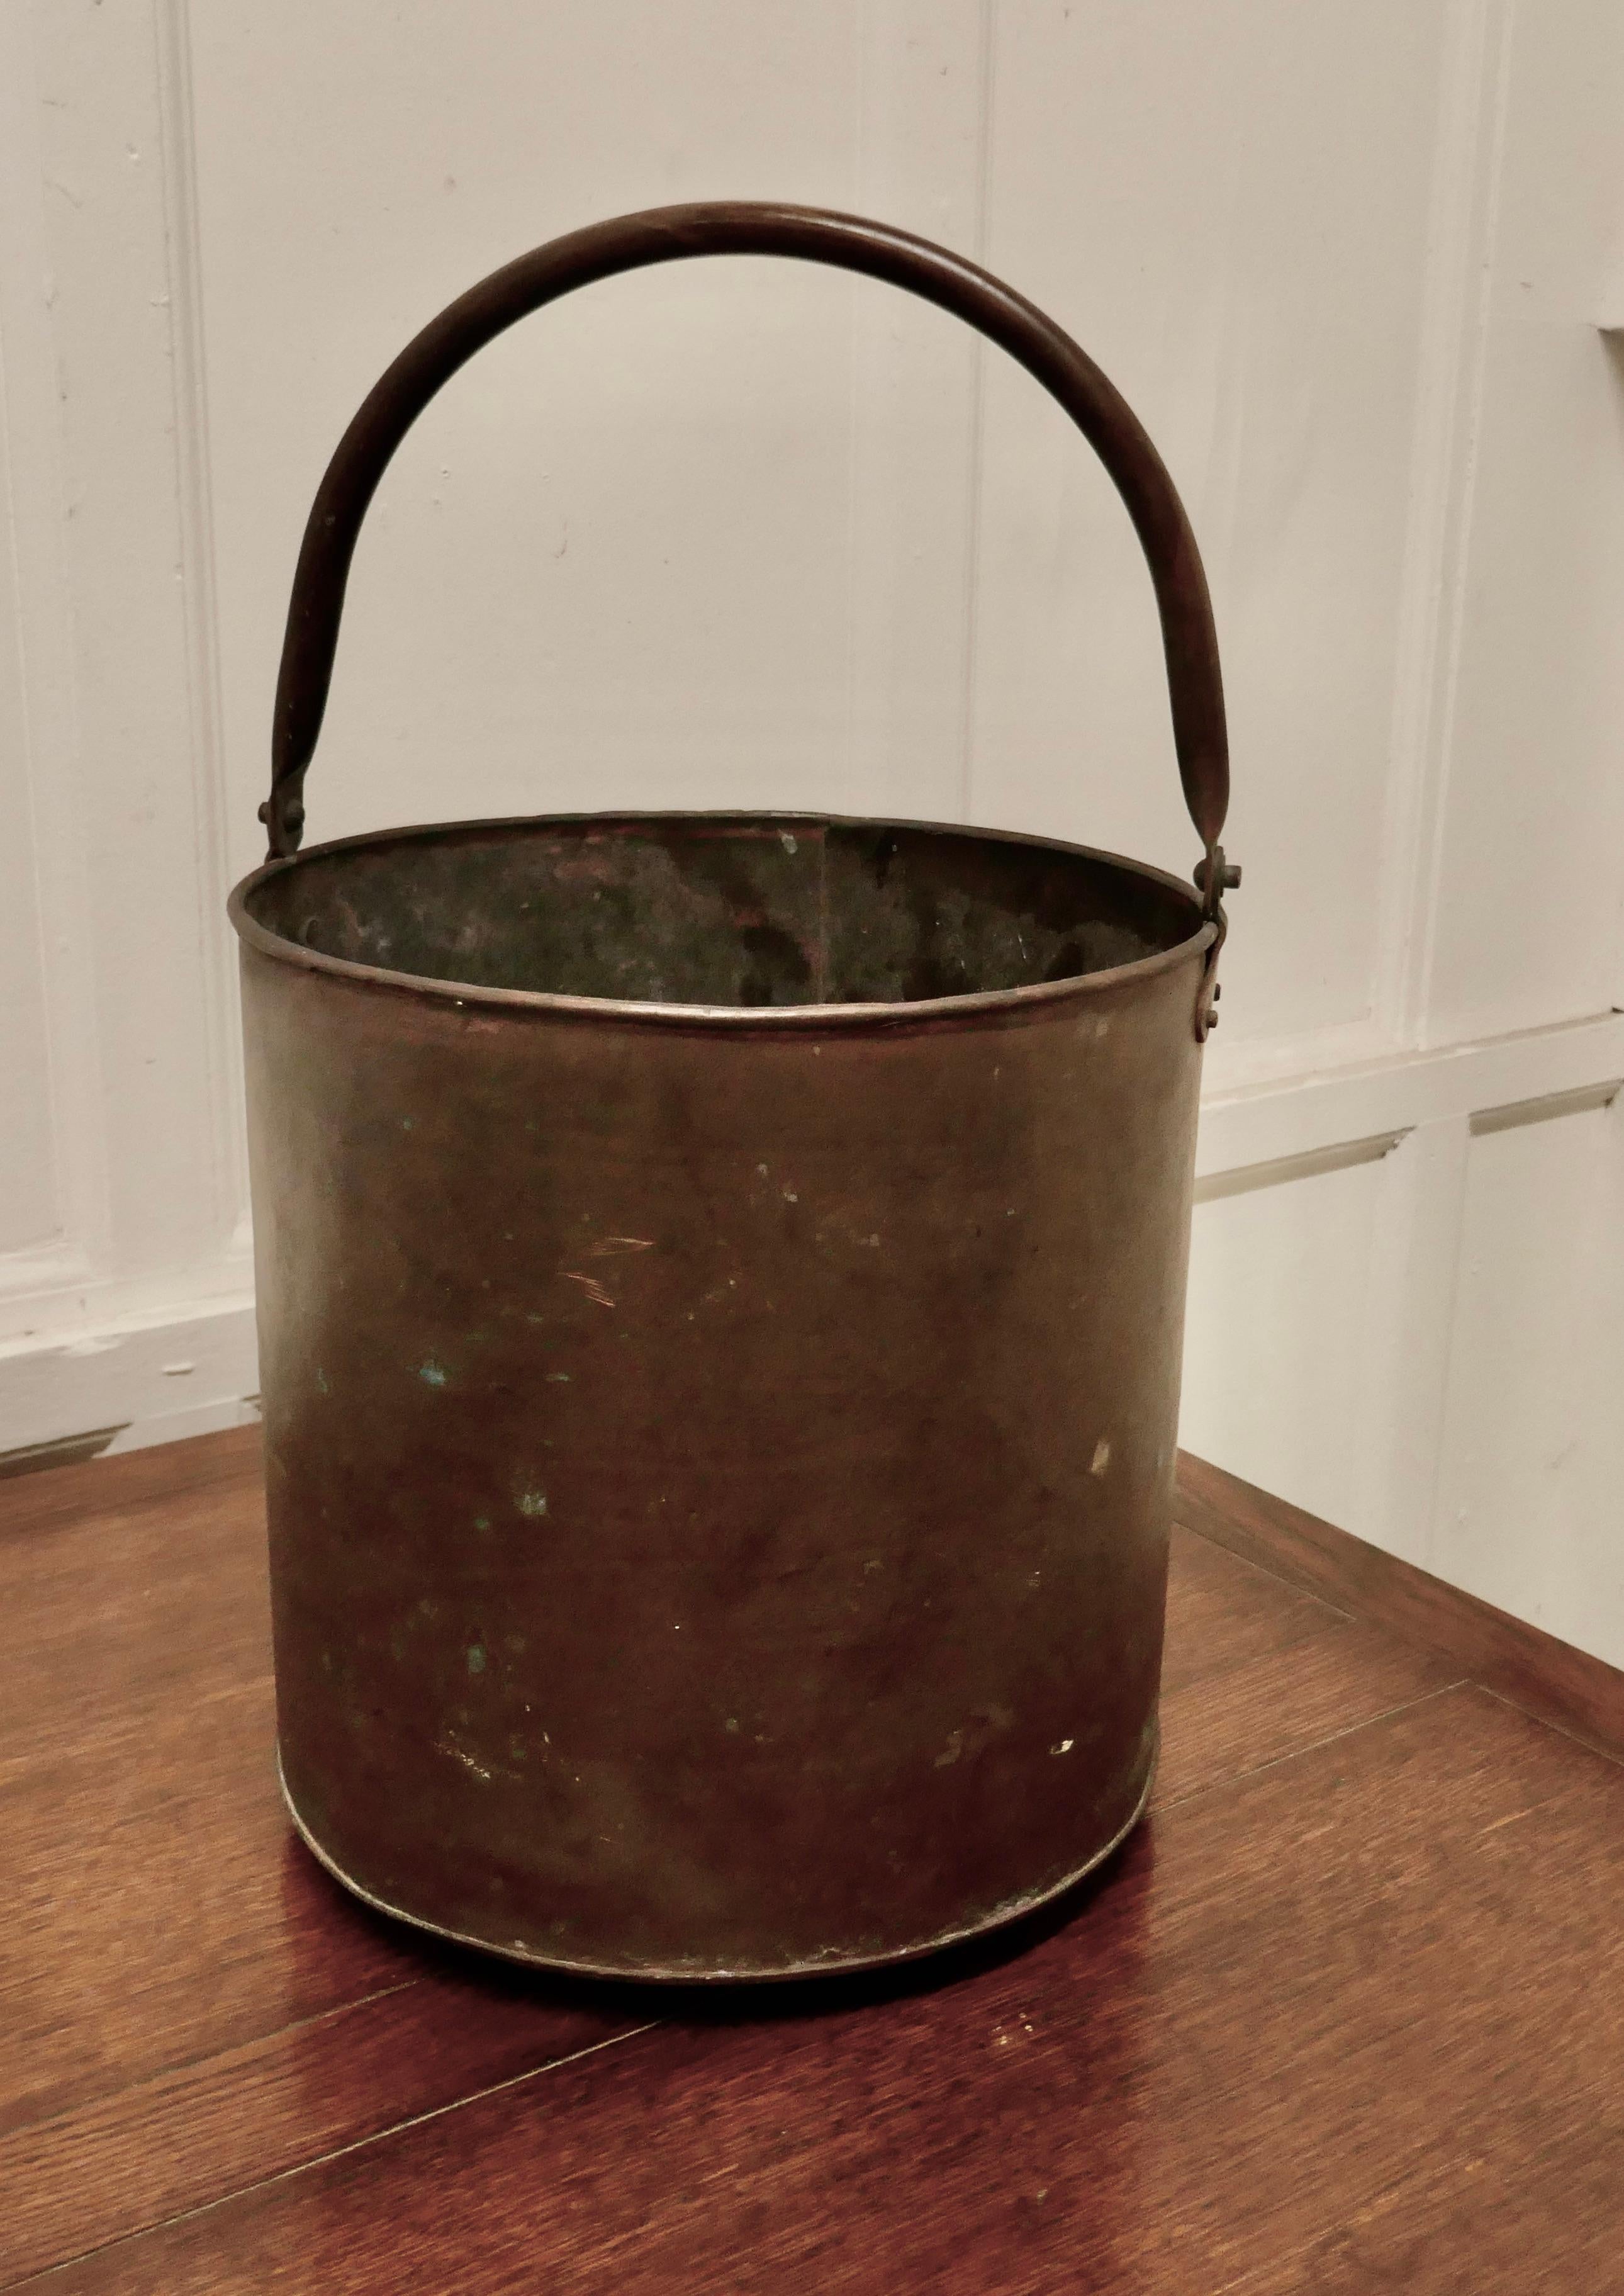 19th Century copper coal bucket 

This is a lovely big copper coal bucket, this is a good big piece and would make a really good coal or log container and handy because it has a riveted brass carrying handle

The cauldron is in good well aged